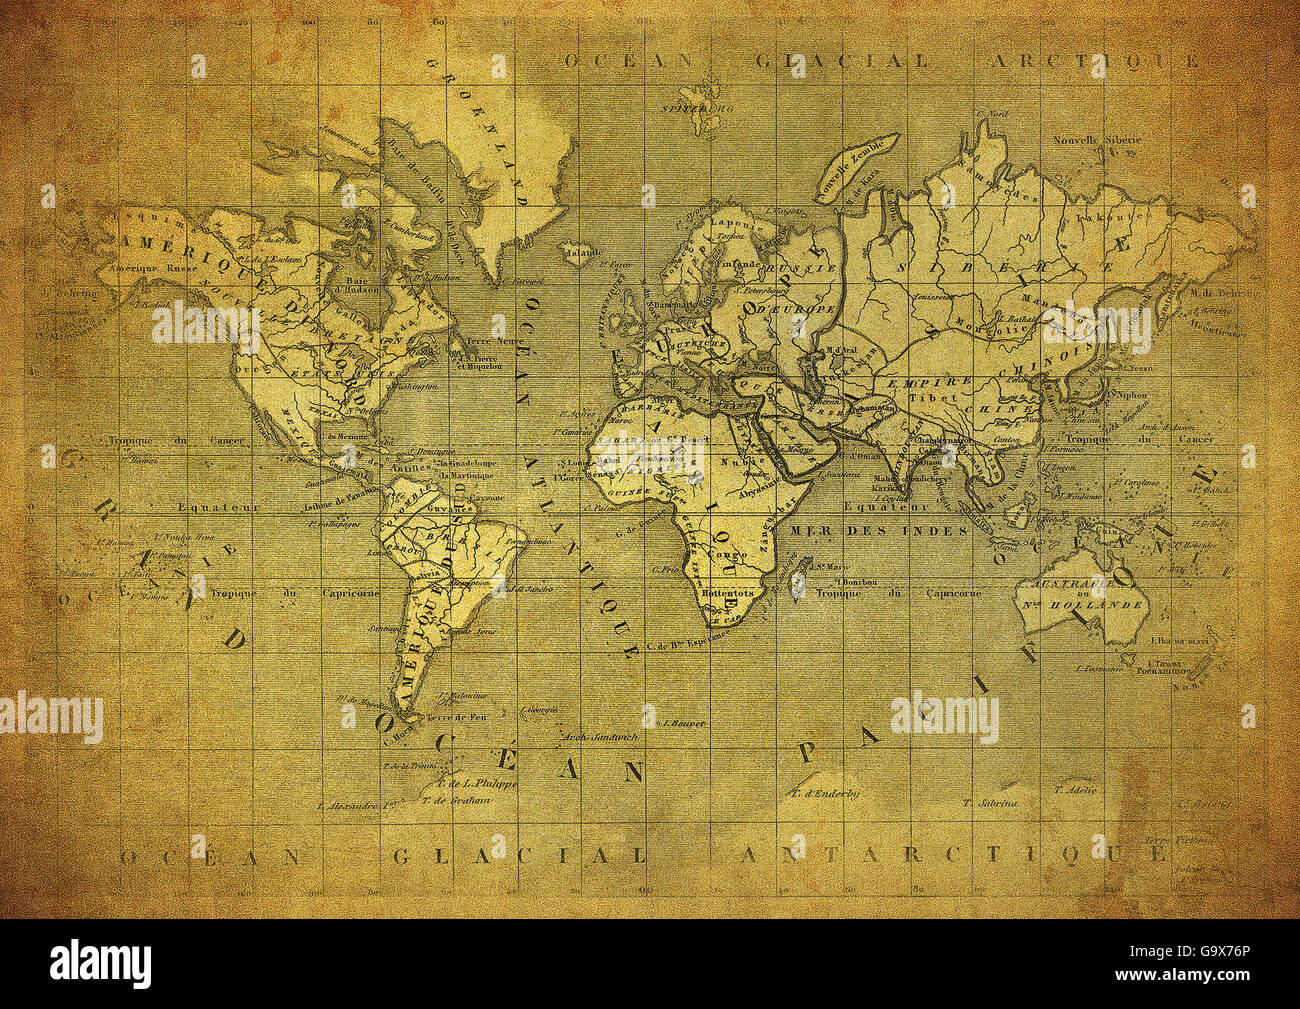 vintage map of the world published in 1847 Stock Photo